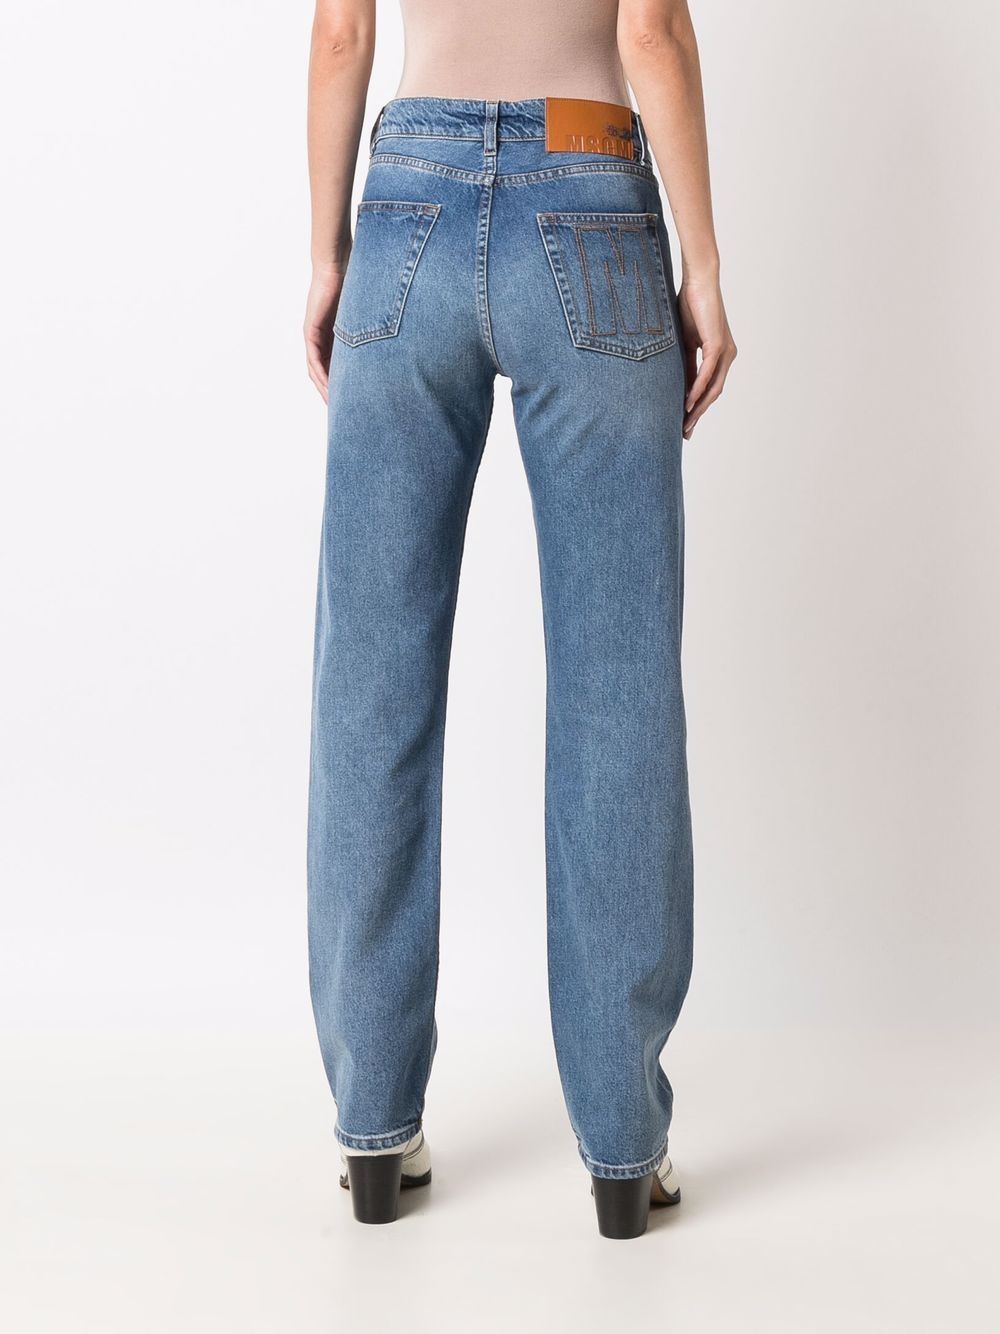 Mid Rise Straight Leg Jeans is